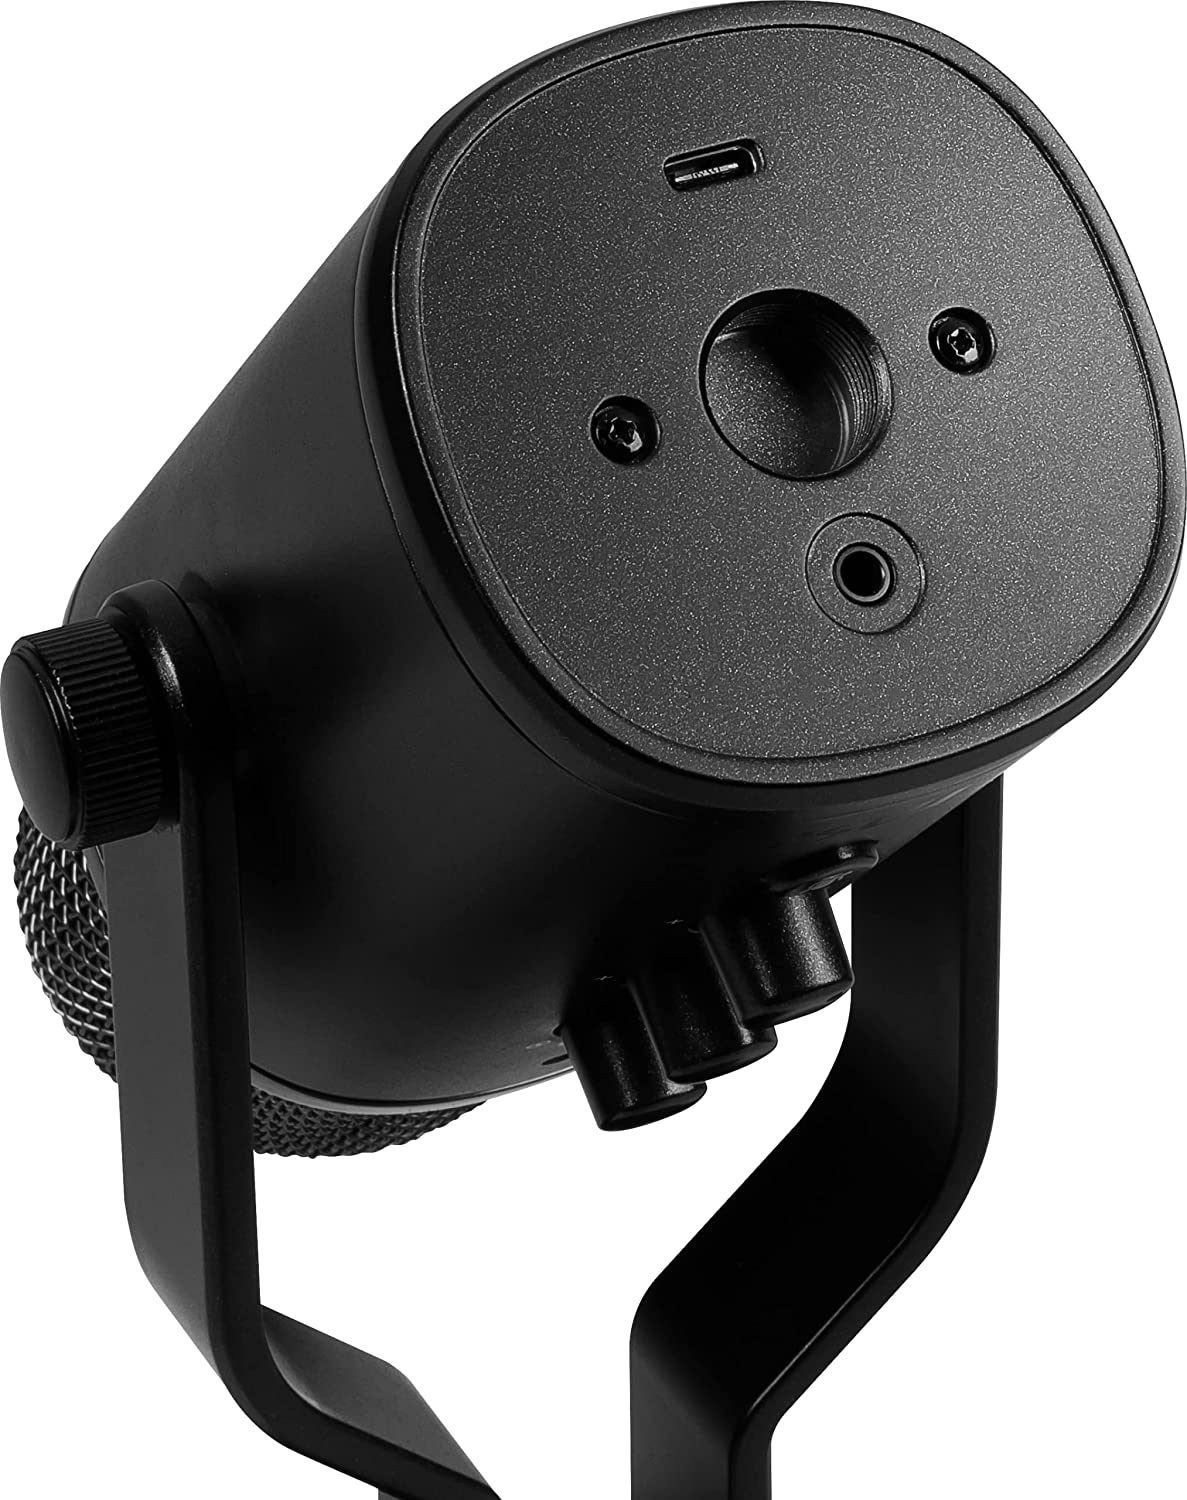 MSI IMMERSE GV60 Streaming Microphone (USB Type-C Interface and 3.5mm Aux, for Professional Applications with Intuituve Control in 4 Modes: Stereo, Omnidirectional, Cardioid and Bidirectional)